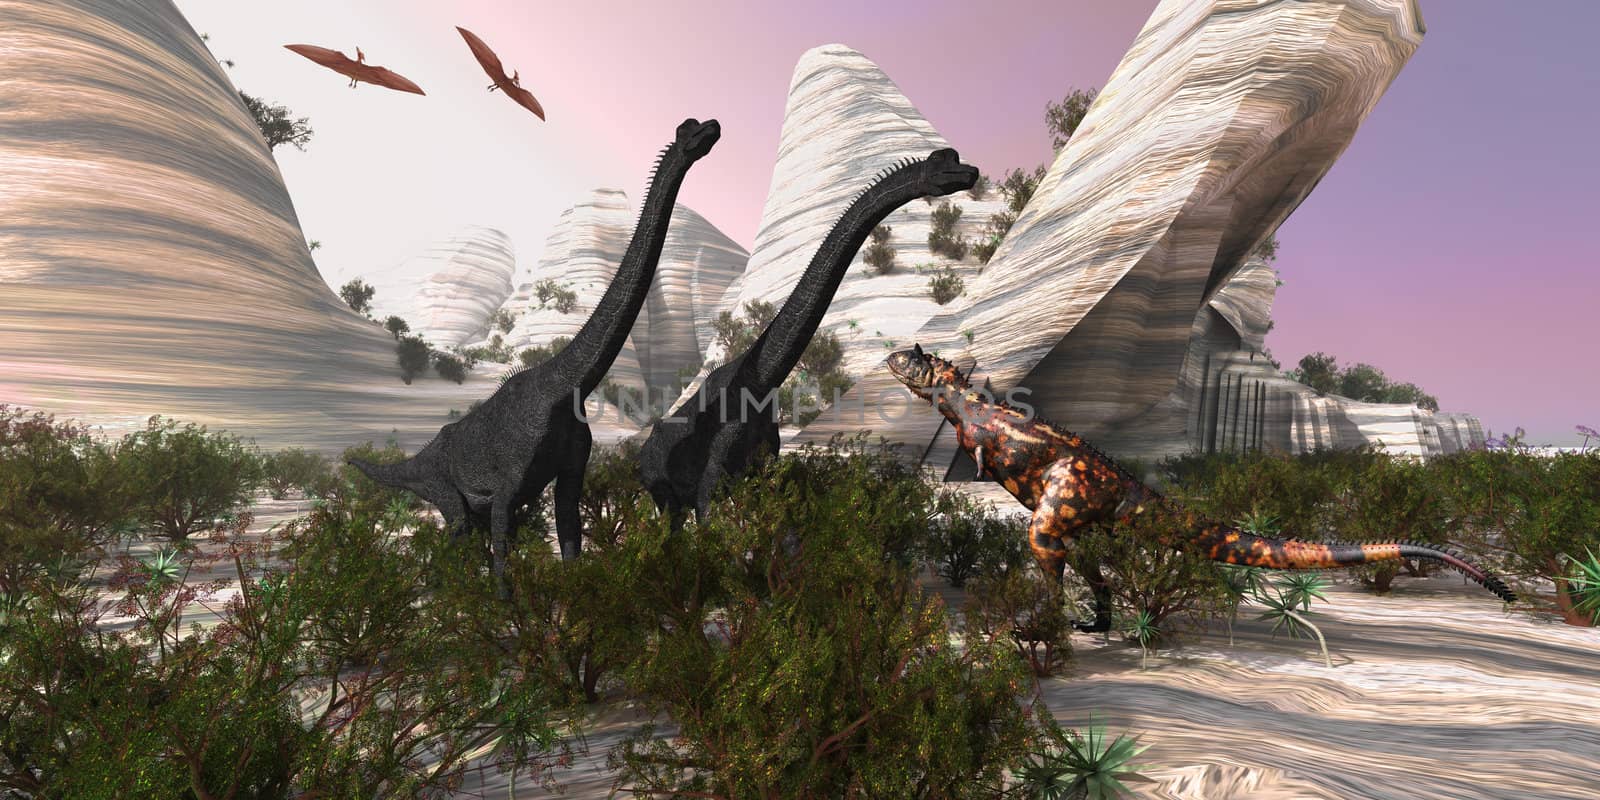 A Carnotaurus dinosaur approaches two huge Brachiosaurus for a battle while two Pterodactyls watch.